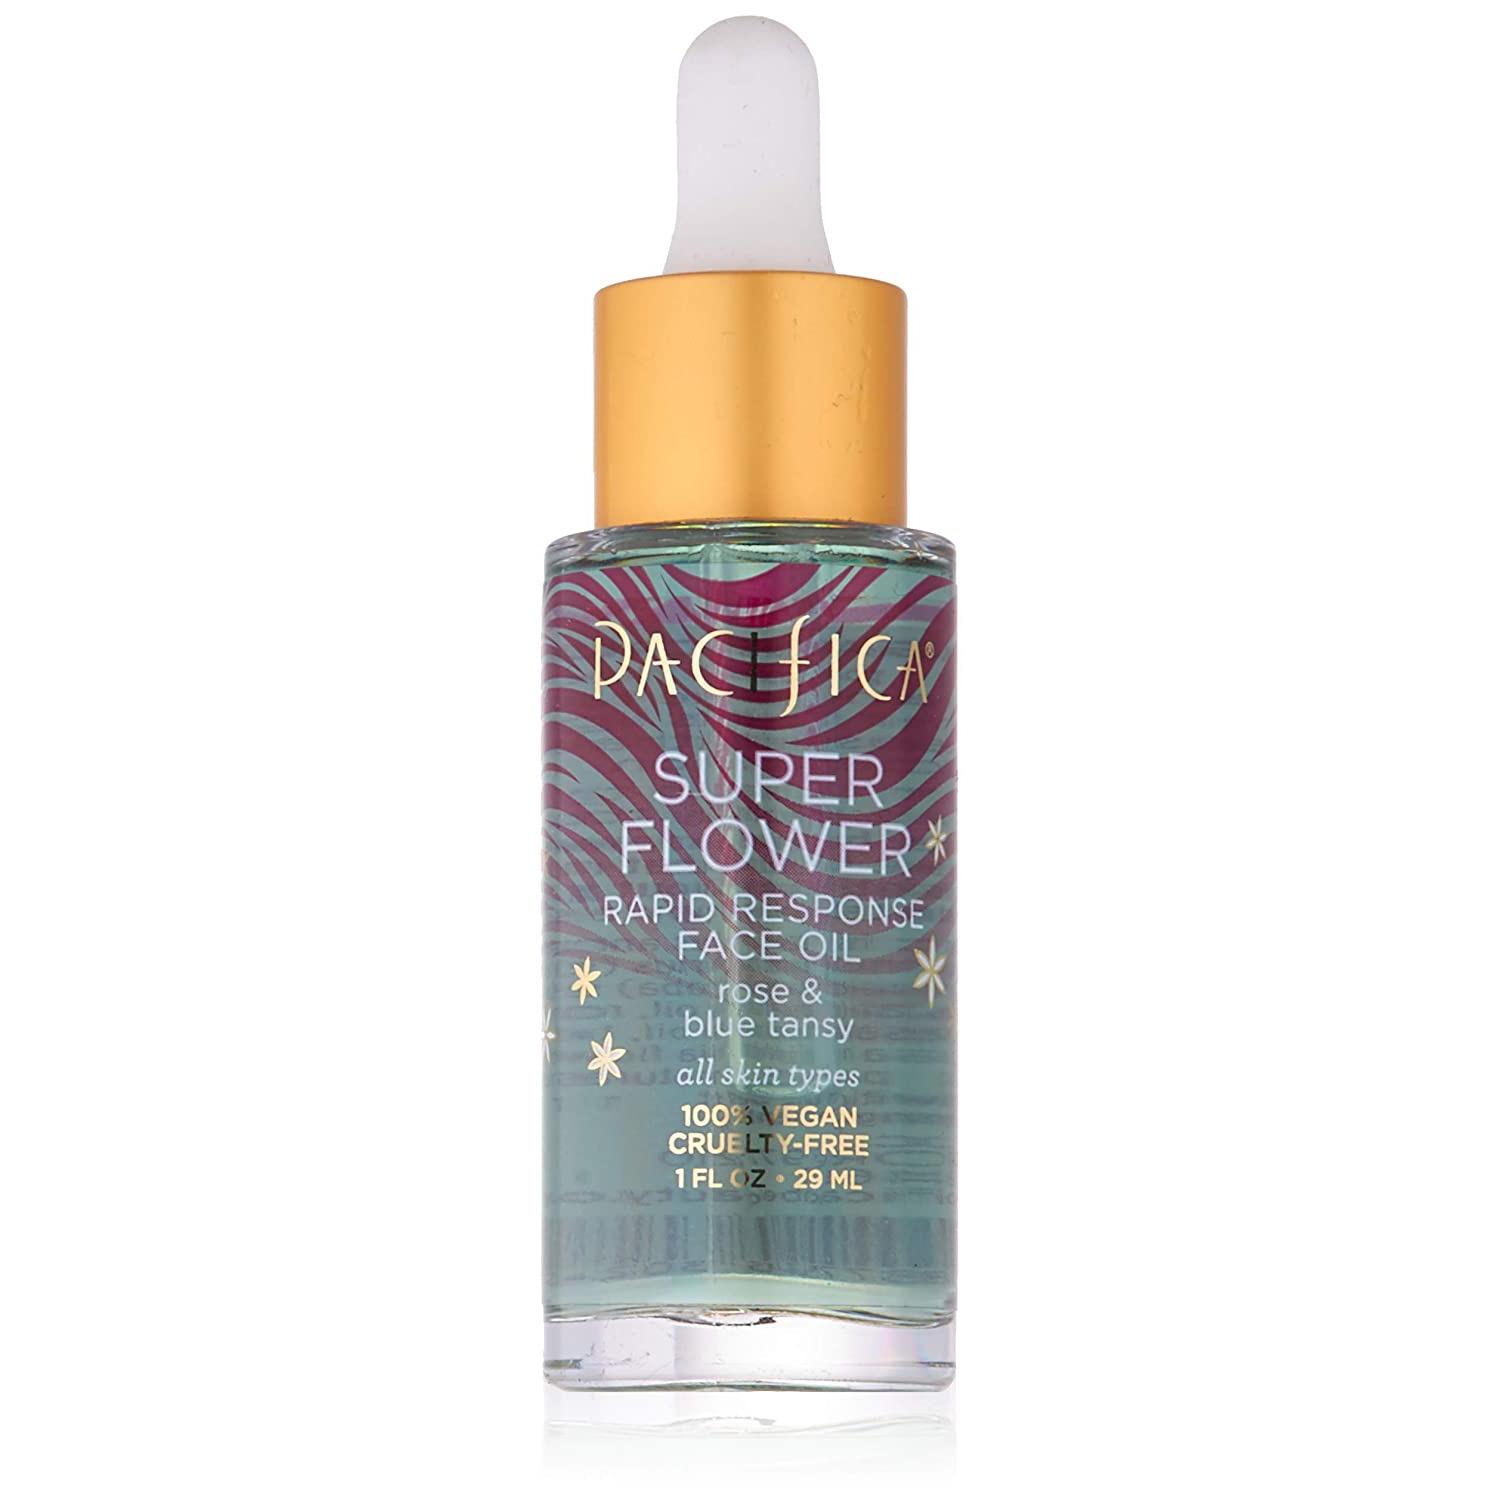 Pacifica Beauty Super Flower Rapid Response Face Oil for $7.59 Shipped